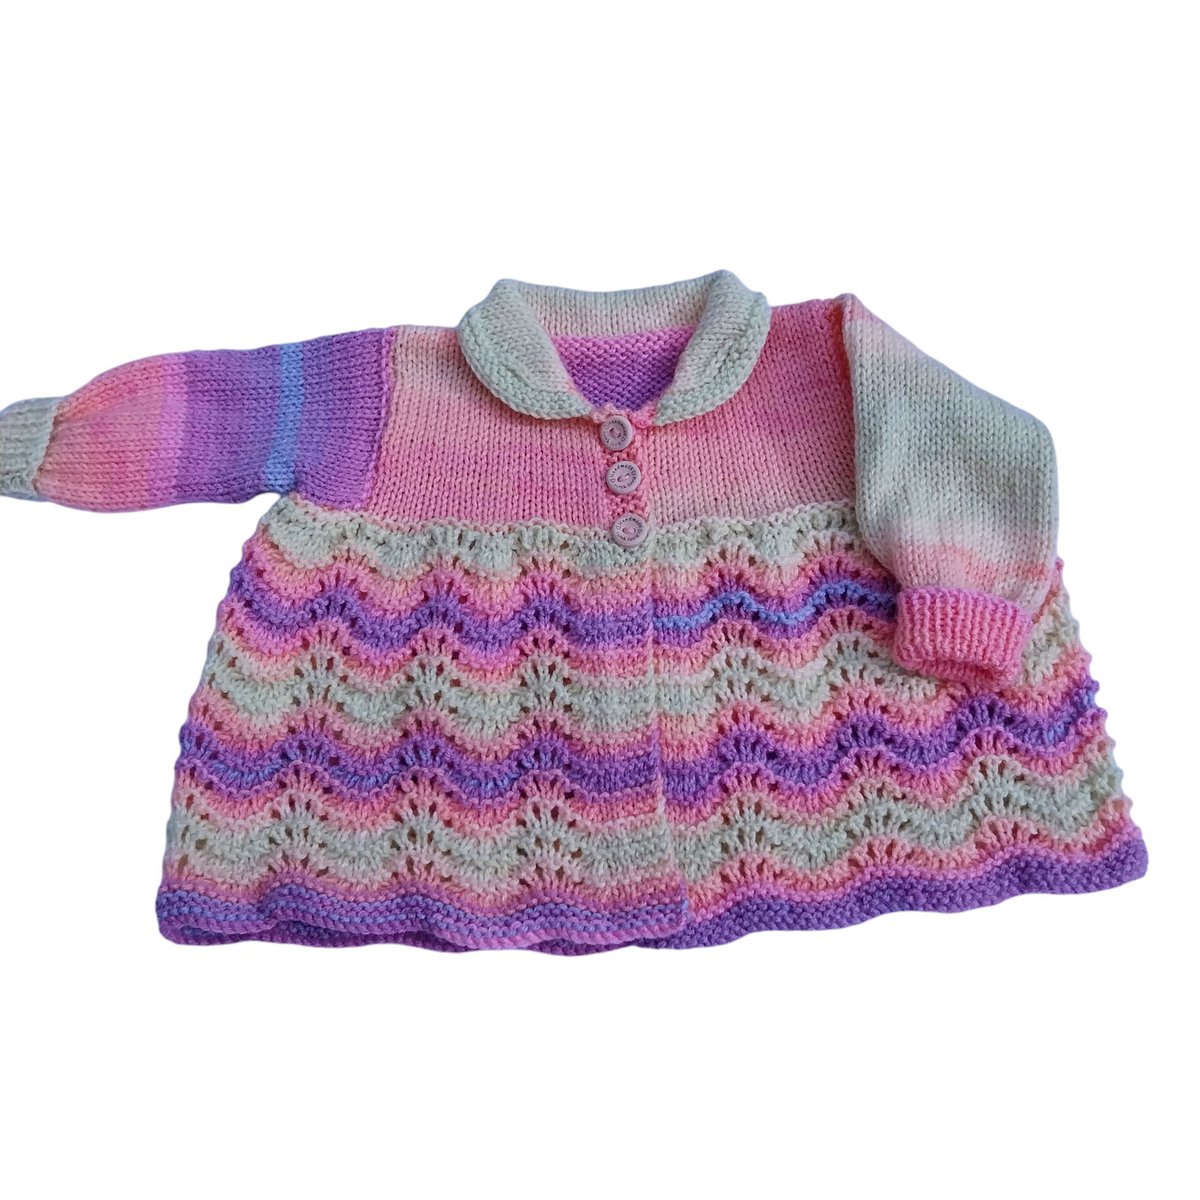 Adorn your newborn girl in a traditional hand-knitted cardigan with multicoloured stripes! Vintage-style matinee coat available now at Knittingtopia. Shop now: knittingtopia.etsy.com/listing/170437… #knittingtopia #etsy #handmade #babyshowergifts #craftbizparty #MHHSBD #shopsmallnetworking